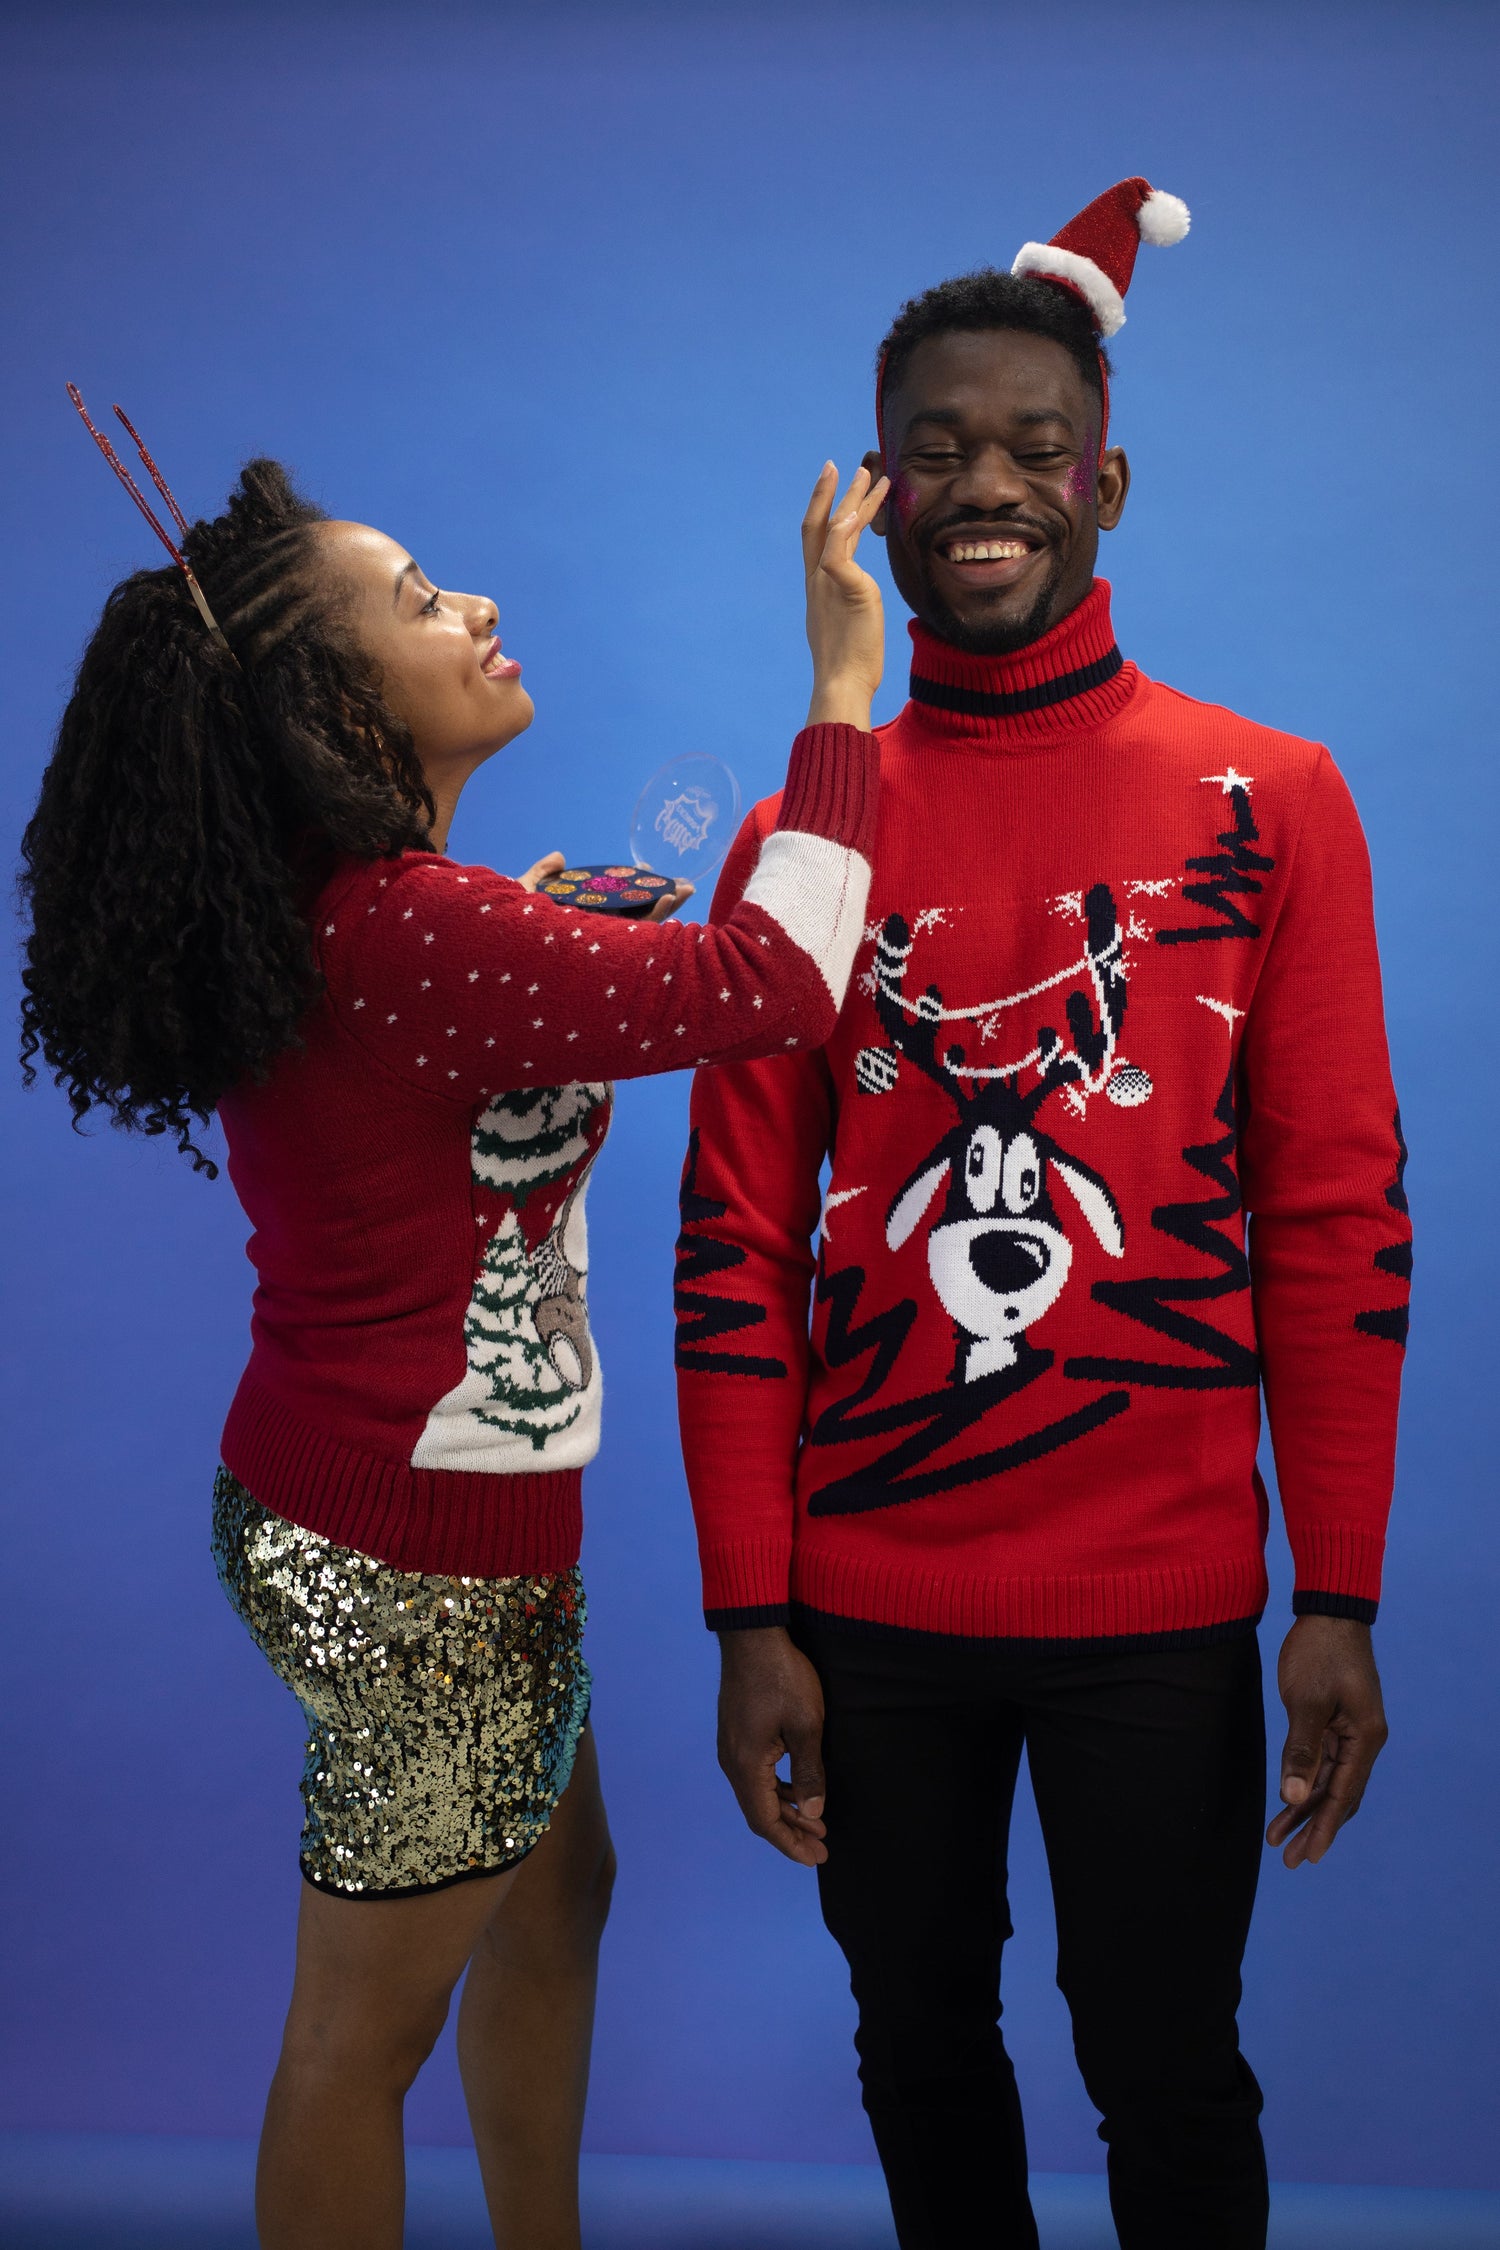 Deck the Halls with Boughs of Tacky: The Ultimate Ugly Christmas Sweater Guide